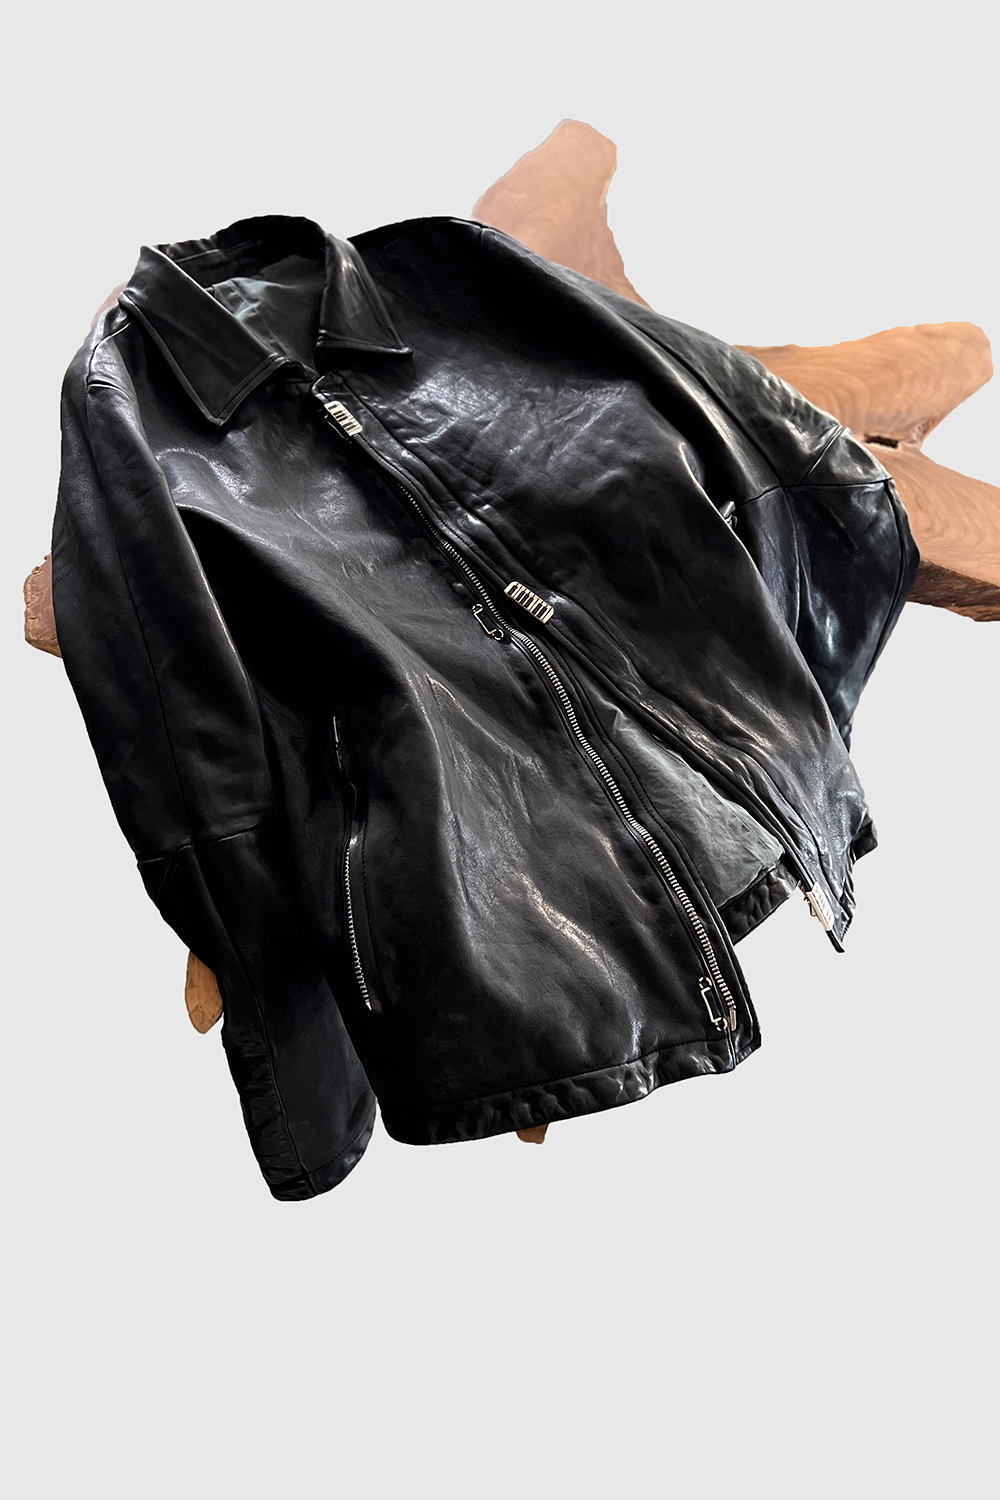 Horse leather Jacket_Update soon